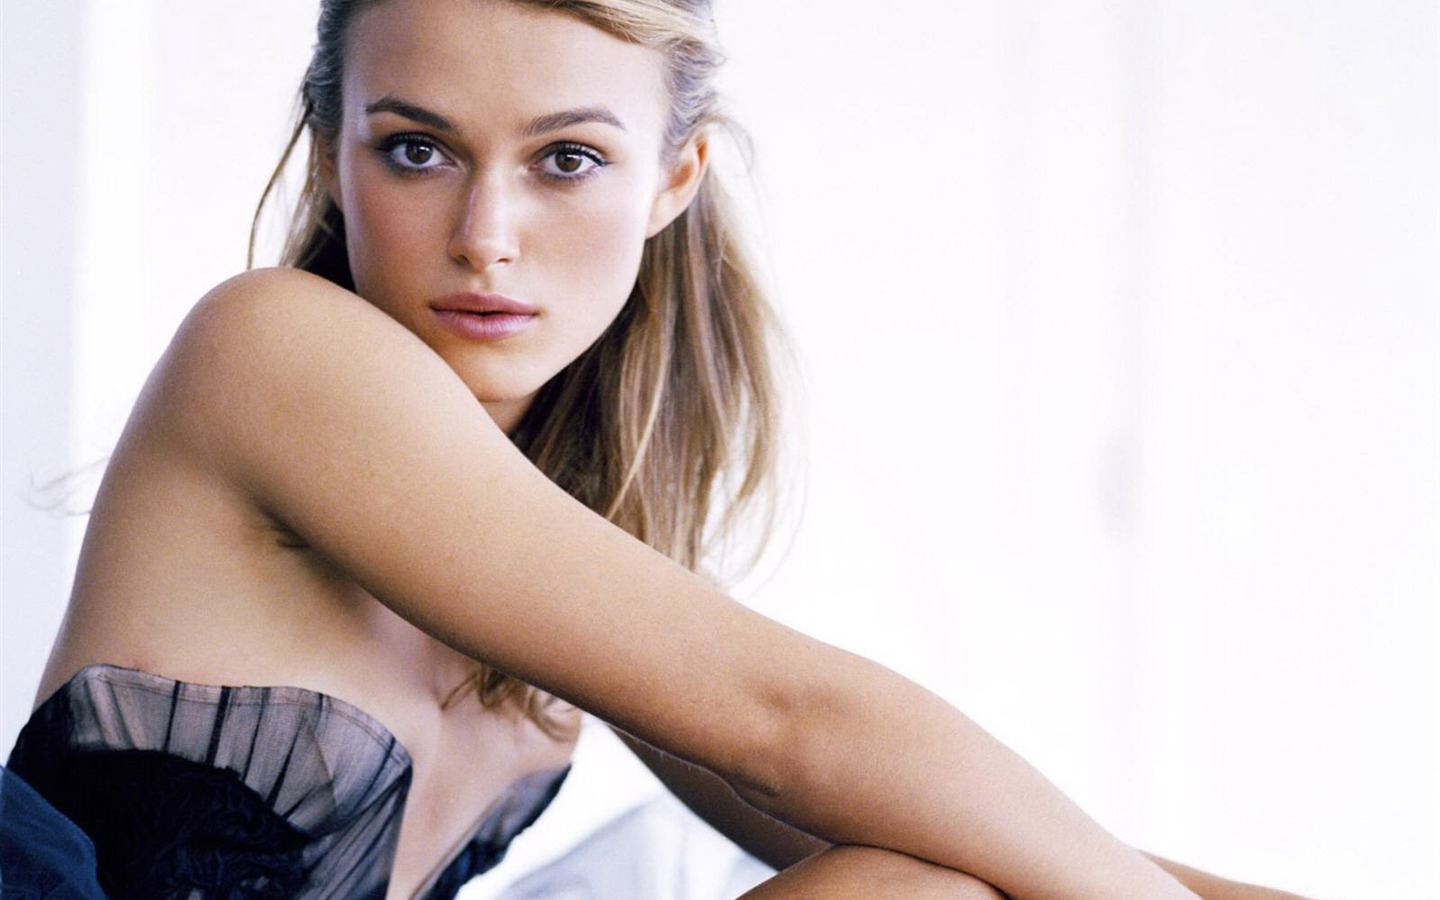 Keira Knightley #059 - 1440x900 Wallpapers Pictures Photos Images